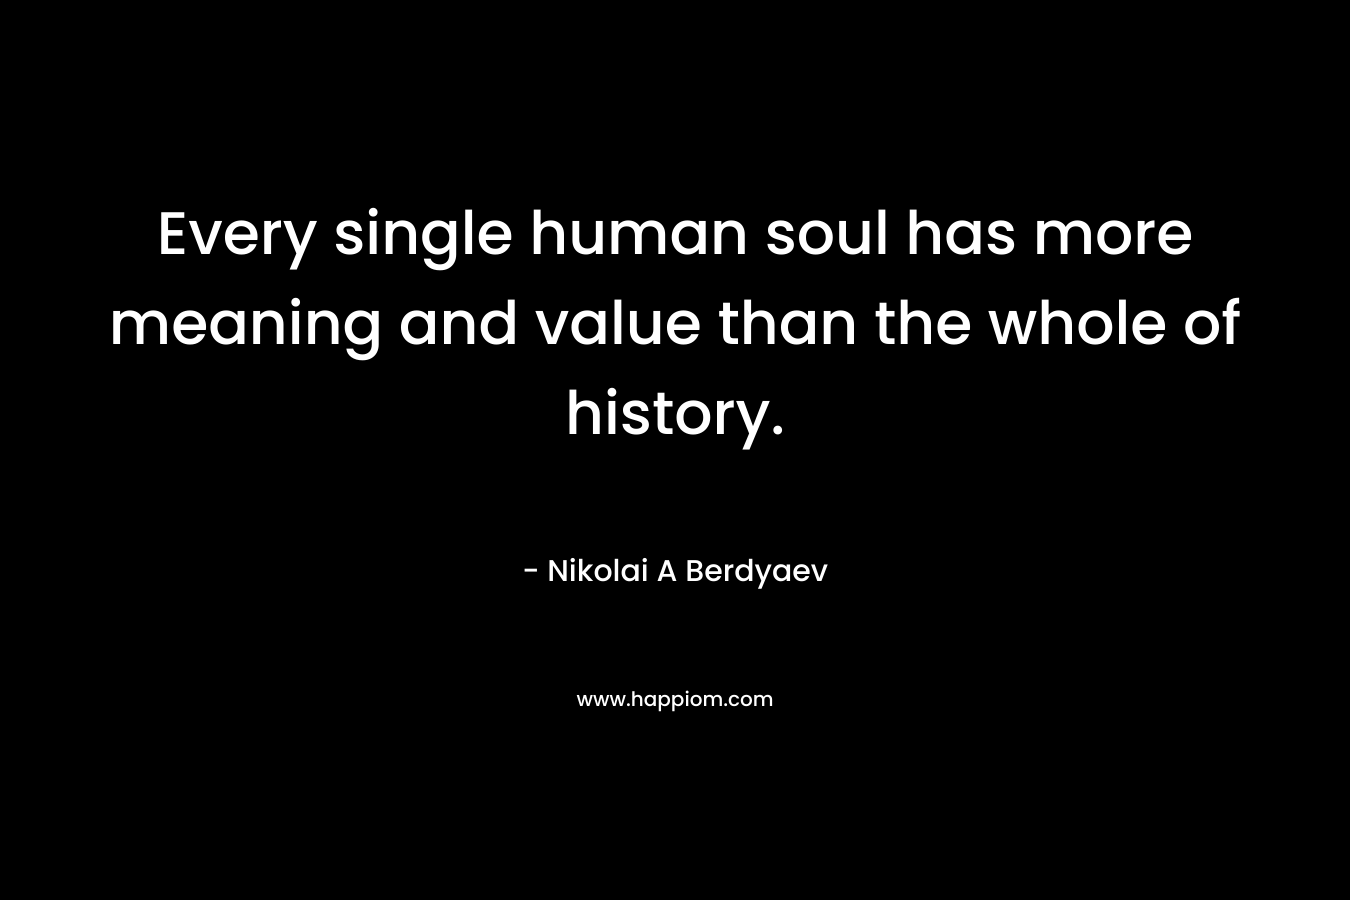 Every single human soul has more meaning and value than the whole of history. – Nikolai A Berdyaev